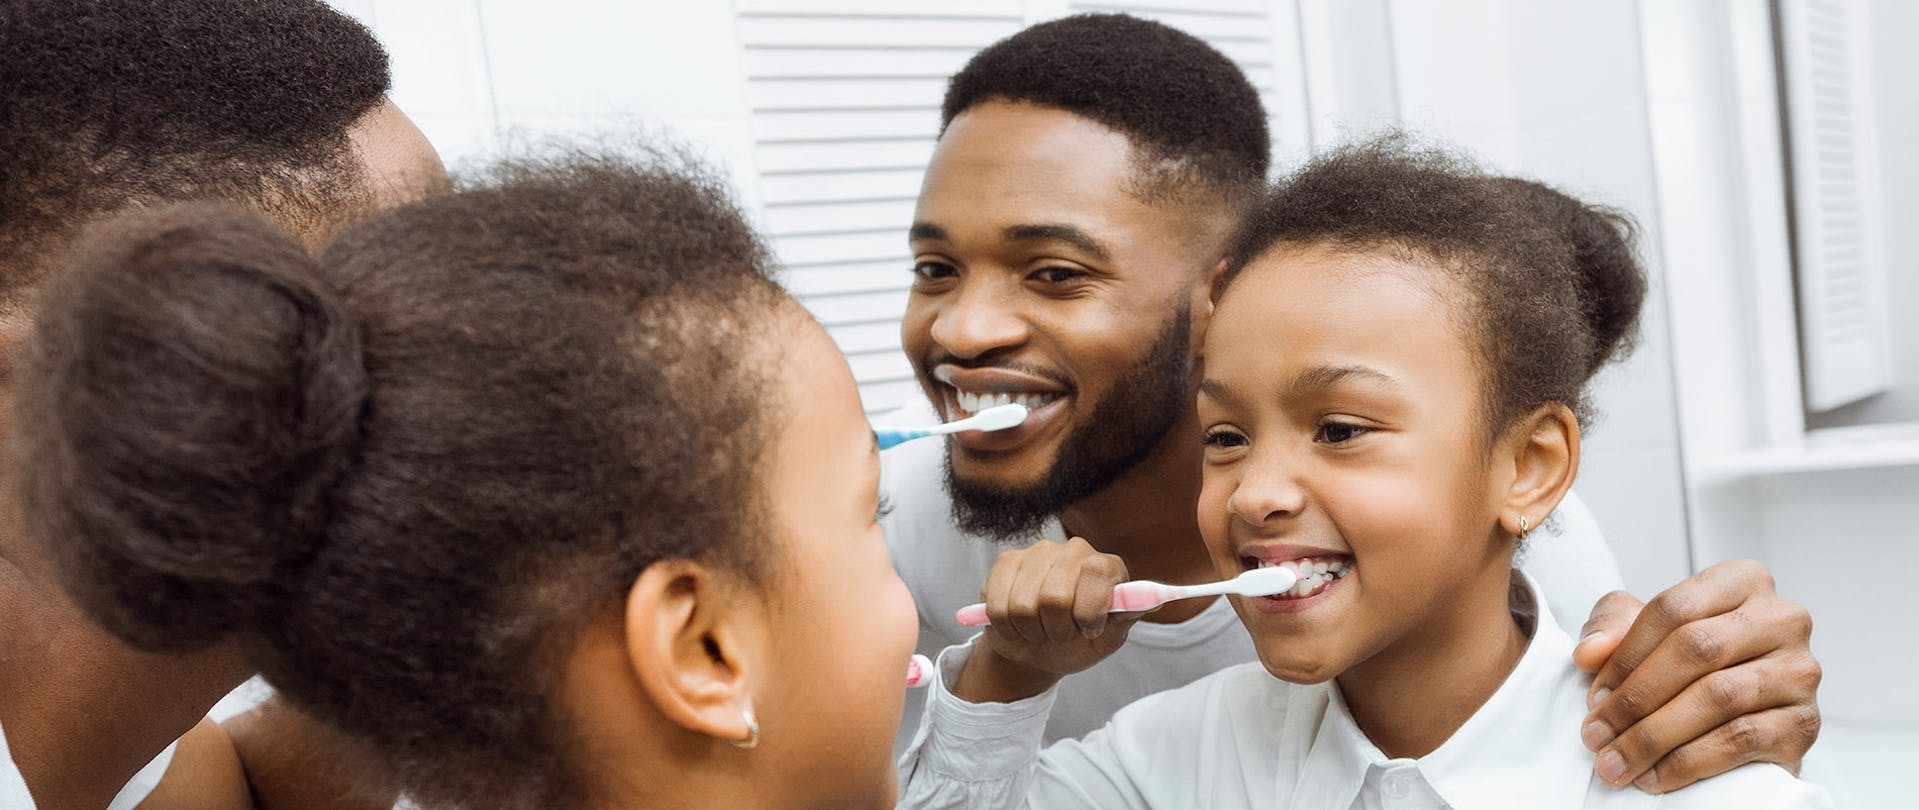 Fluoride in Water Family Brushes Teeth using Fluoride